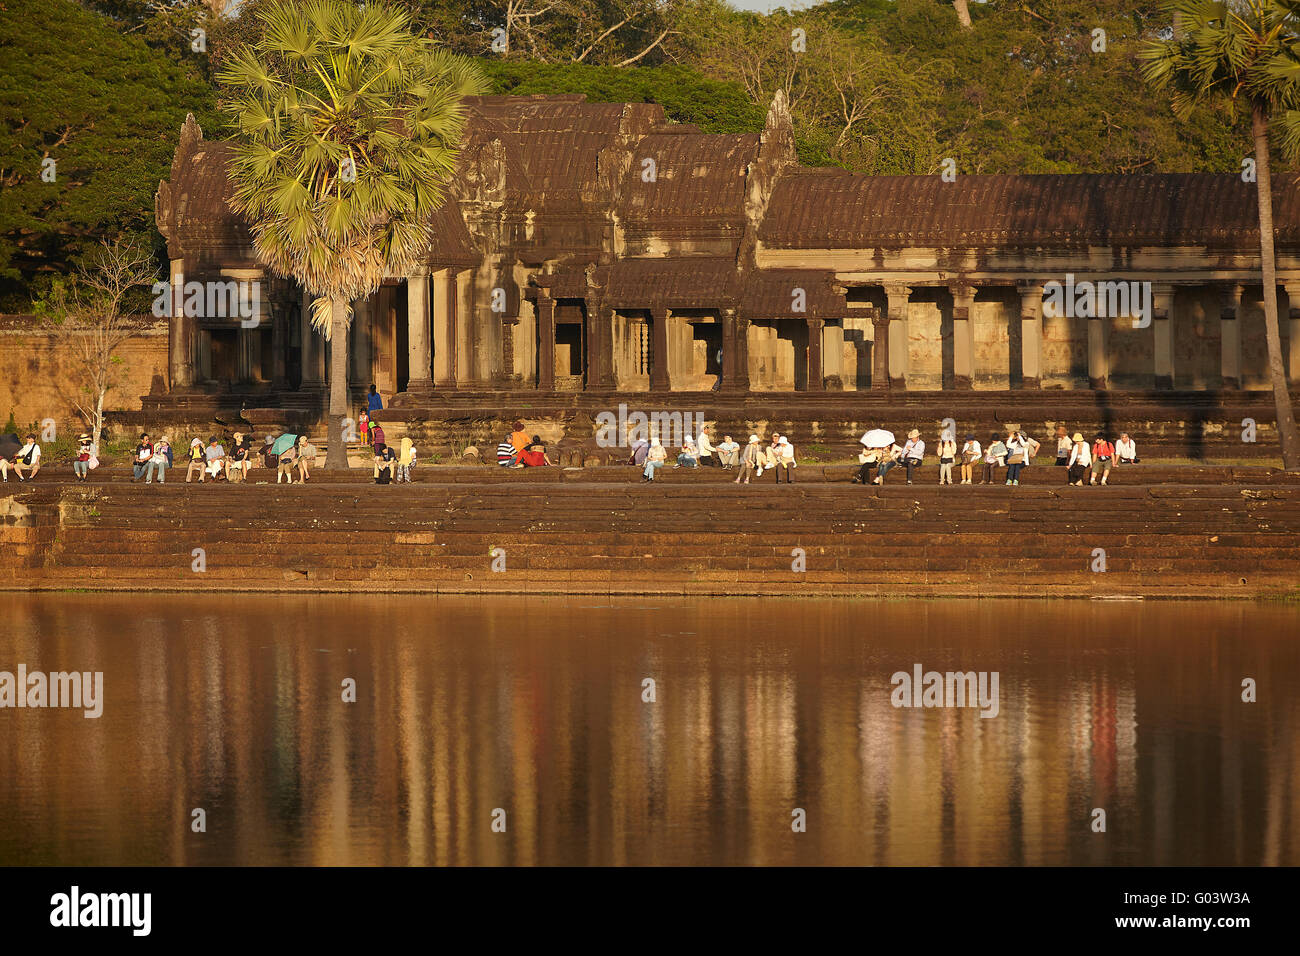 Tourists relaxing by moat around Angkor Wat (12th century Khmer temple), Angkor World Heritage Site, Siem Reap, Cambodia Stock Photo